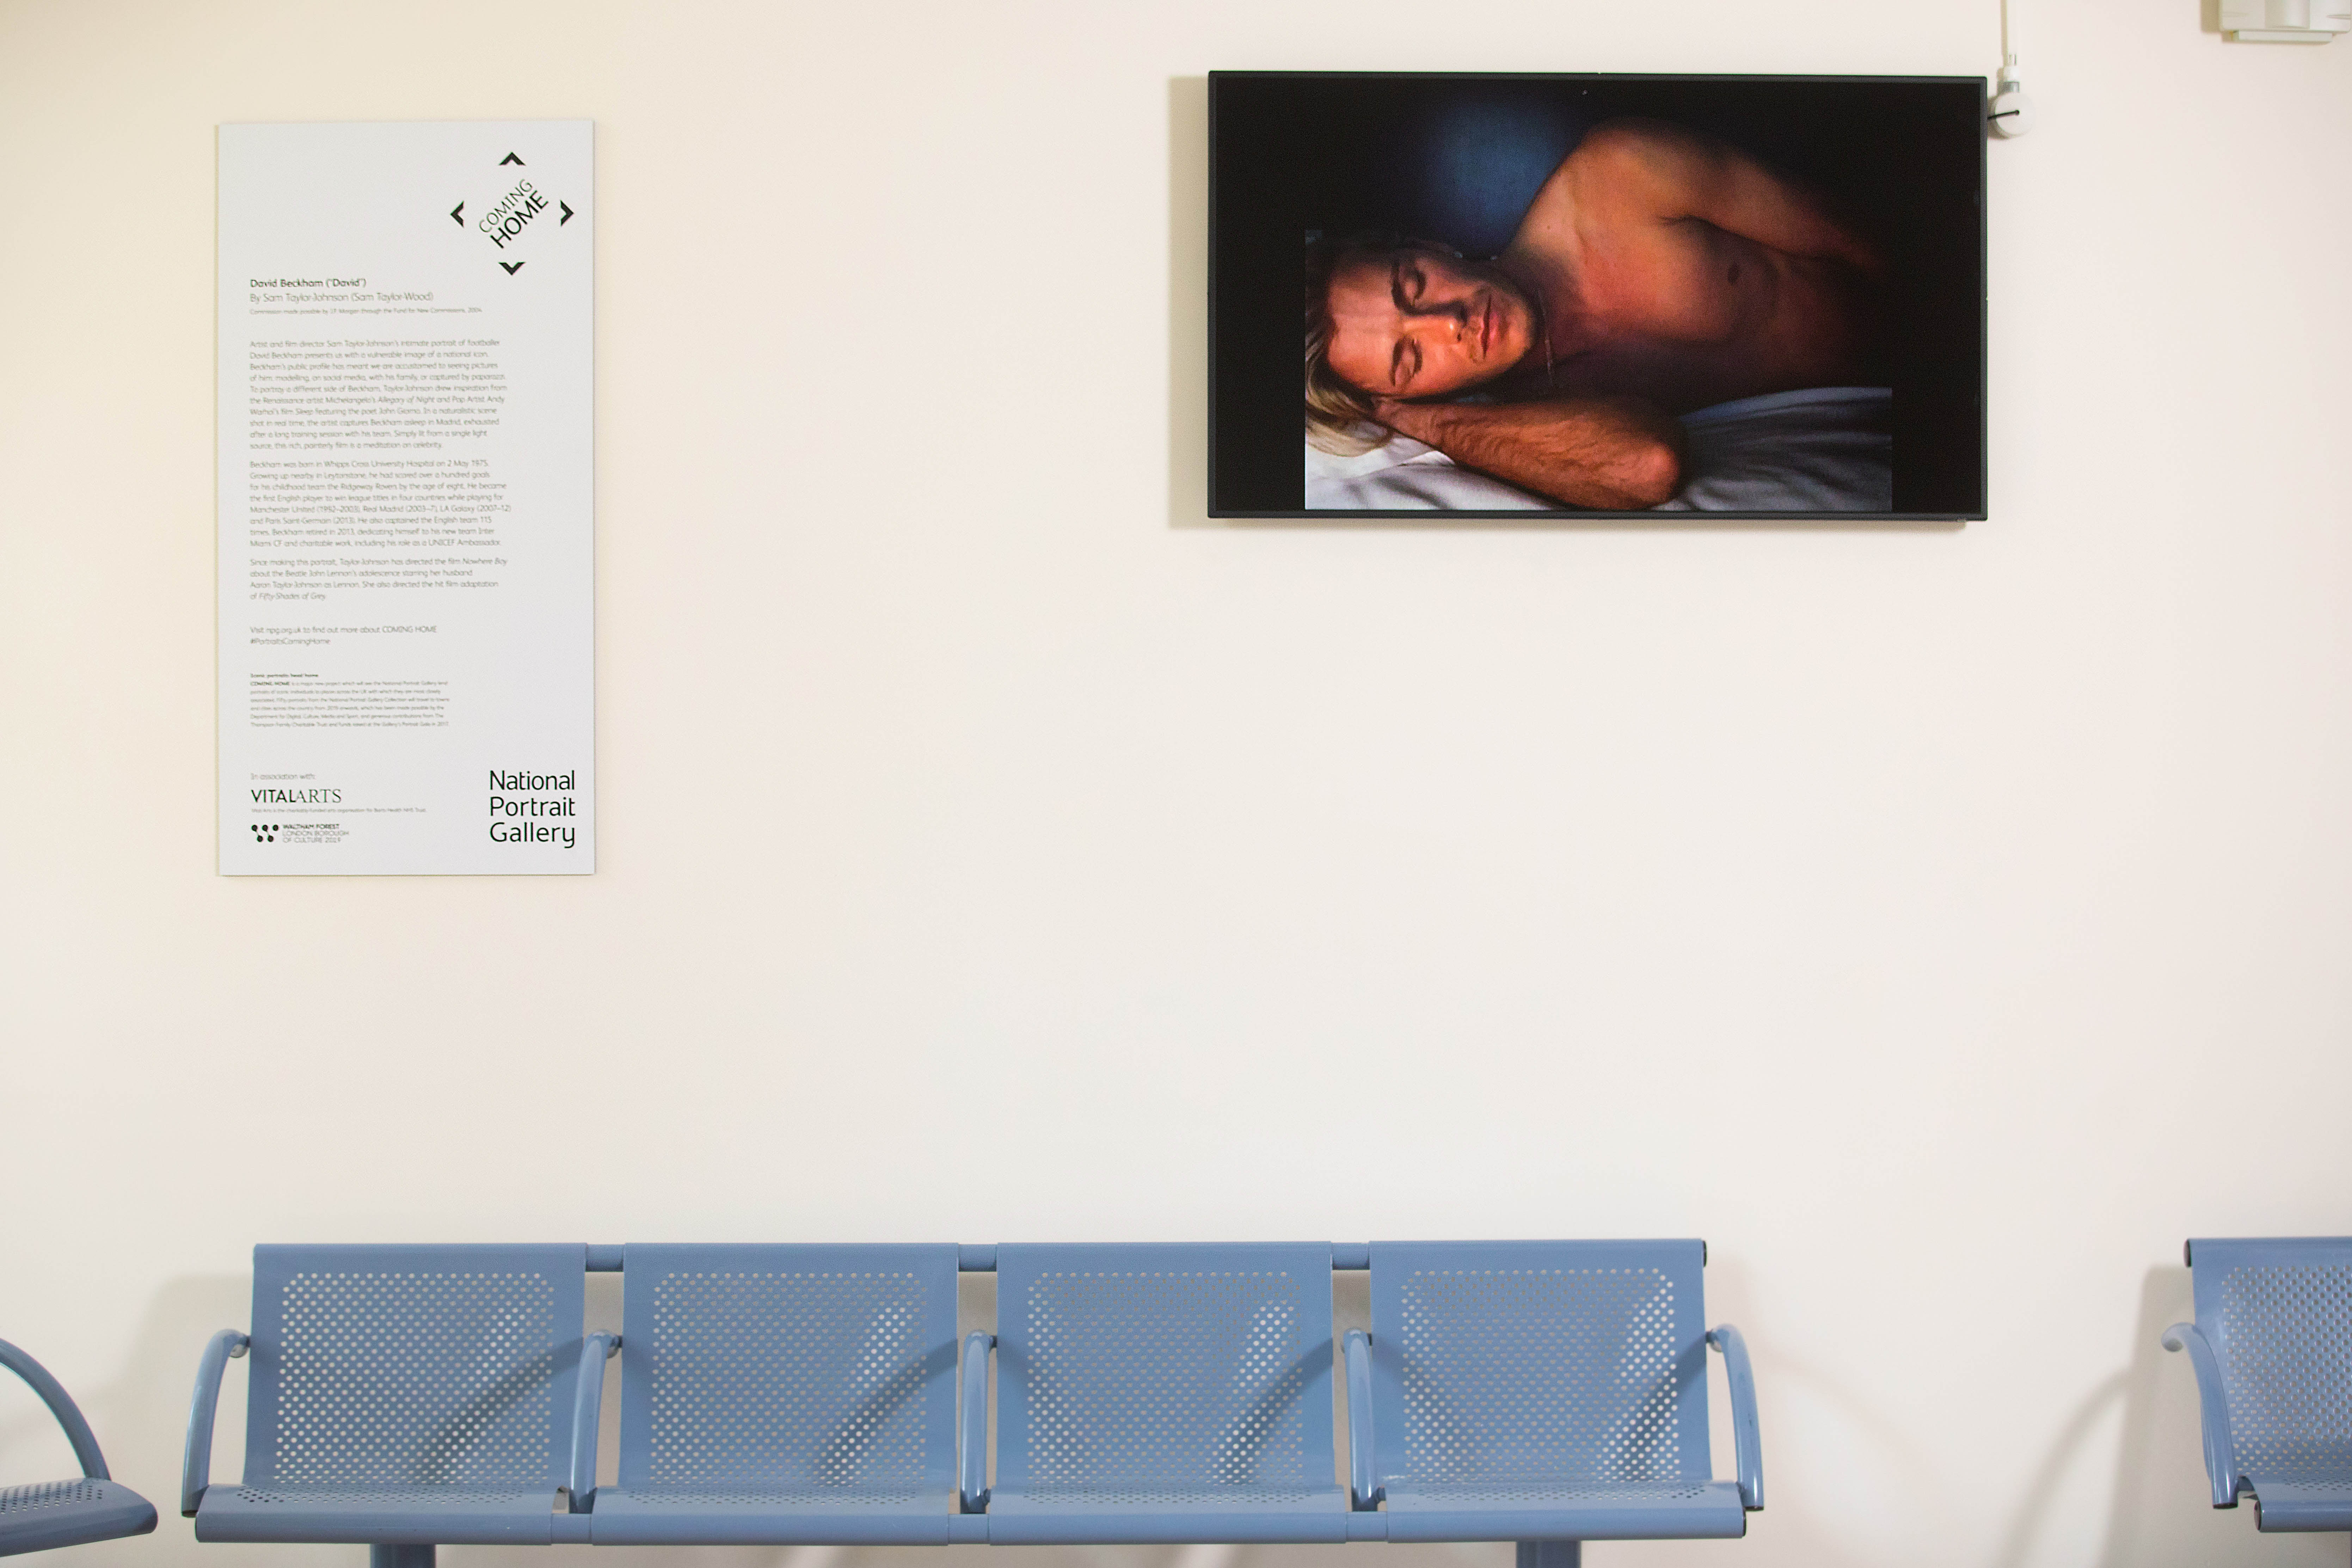 The film portrait of David Beckham by Sam Taylor-Johnson has a new homeHospital